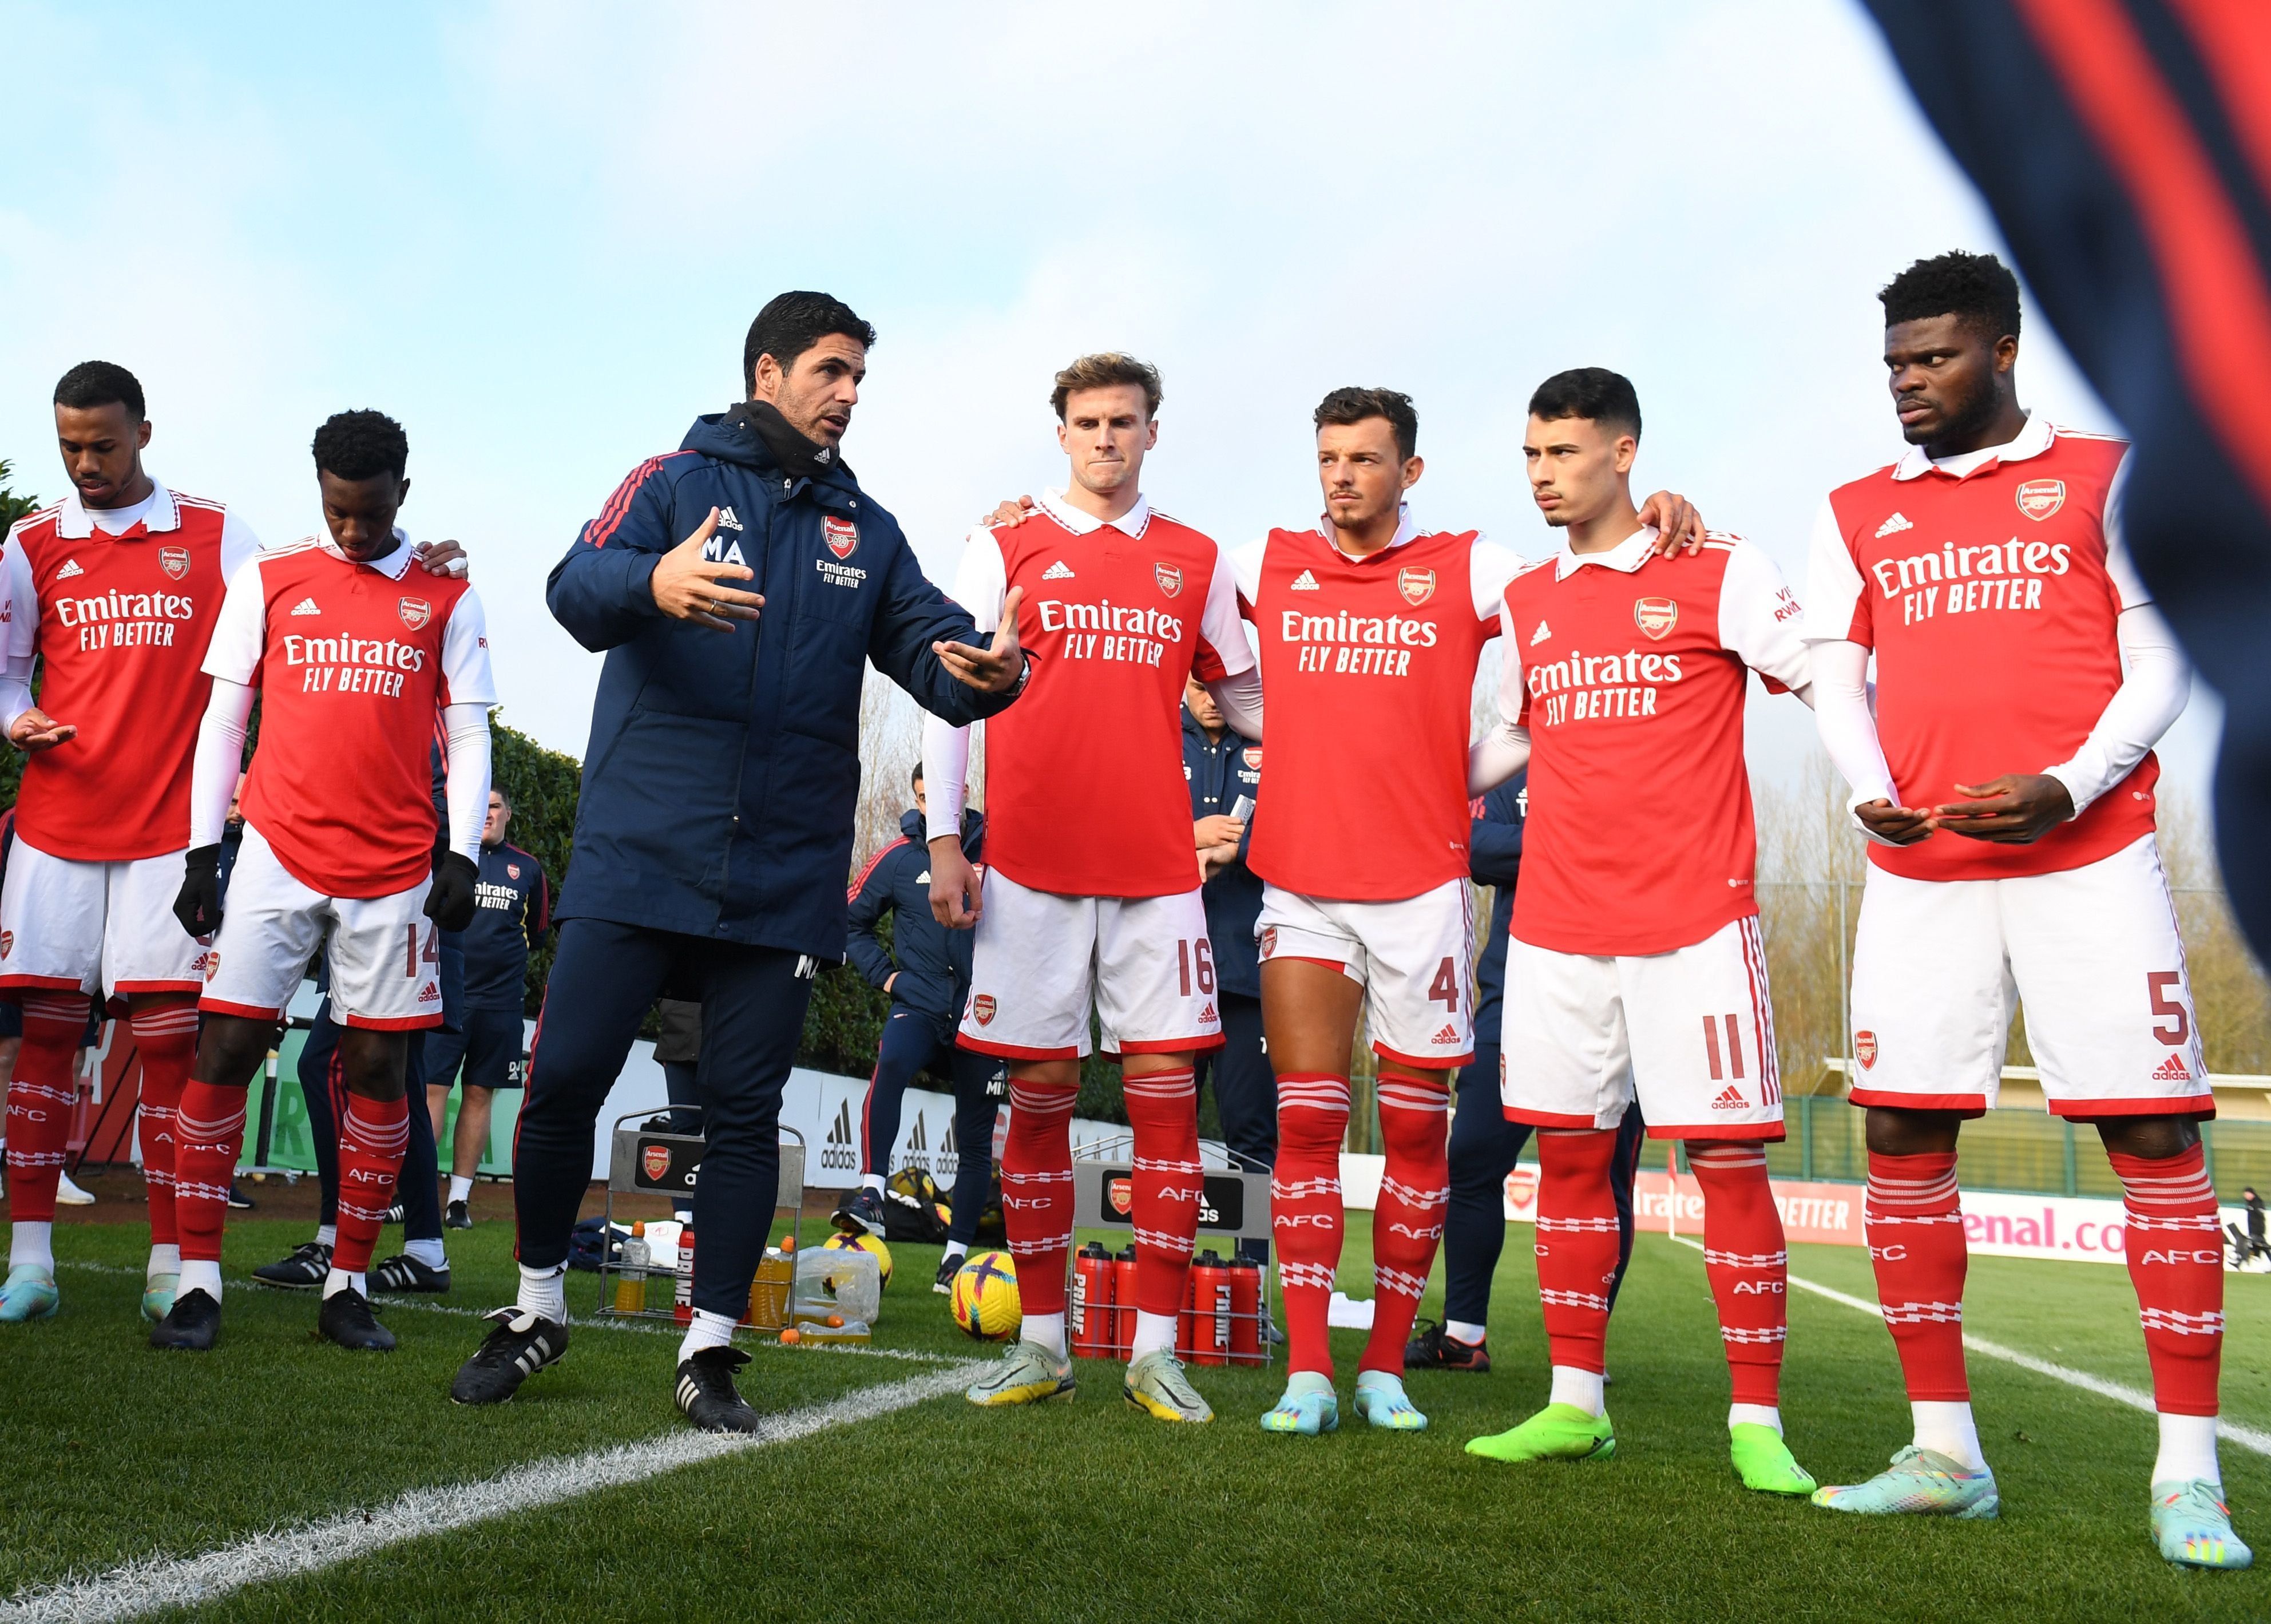  Mikel Arteta is pictured here giving a team talk to his Arsenal teammates during a match.